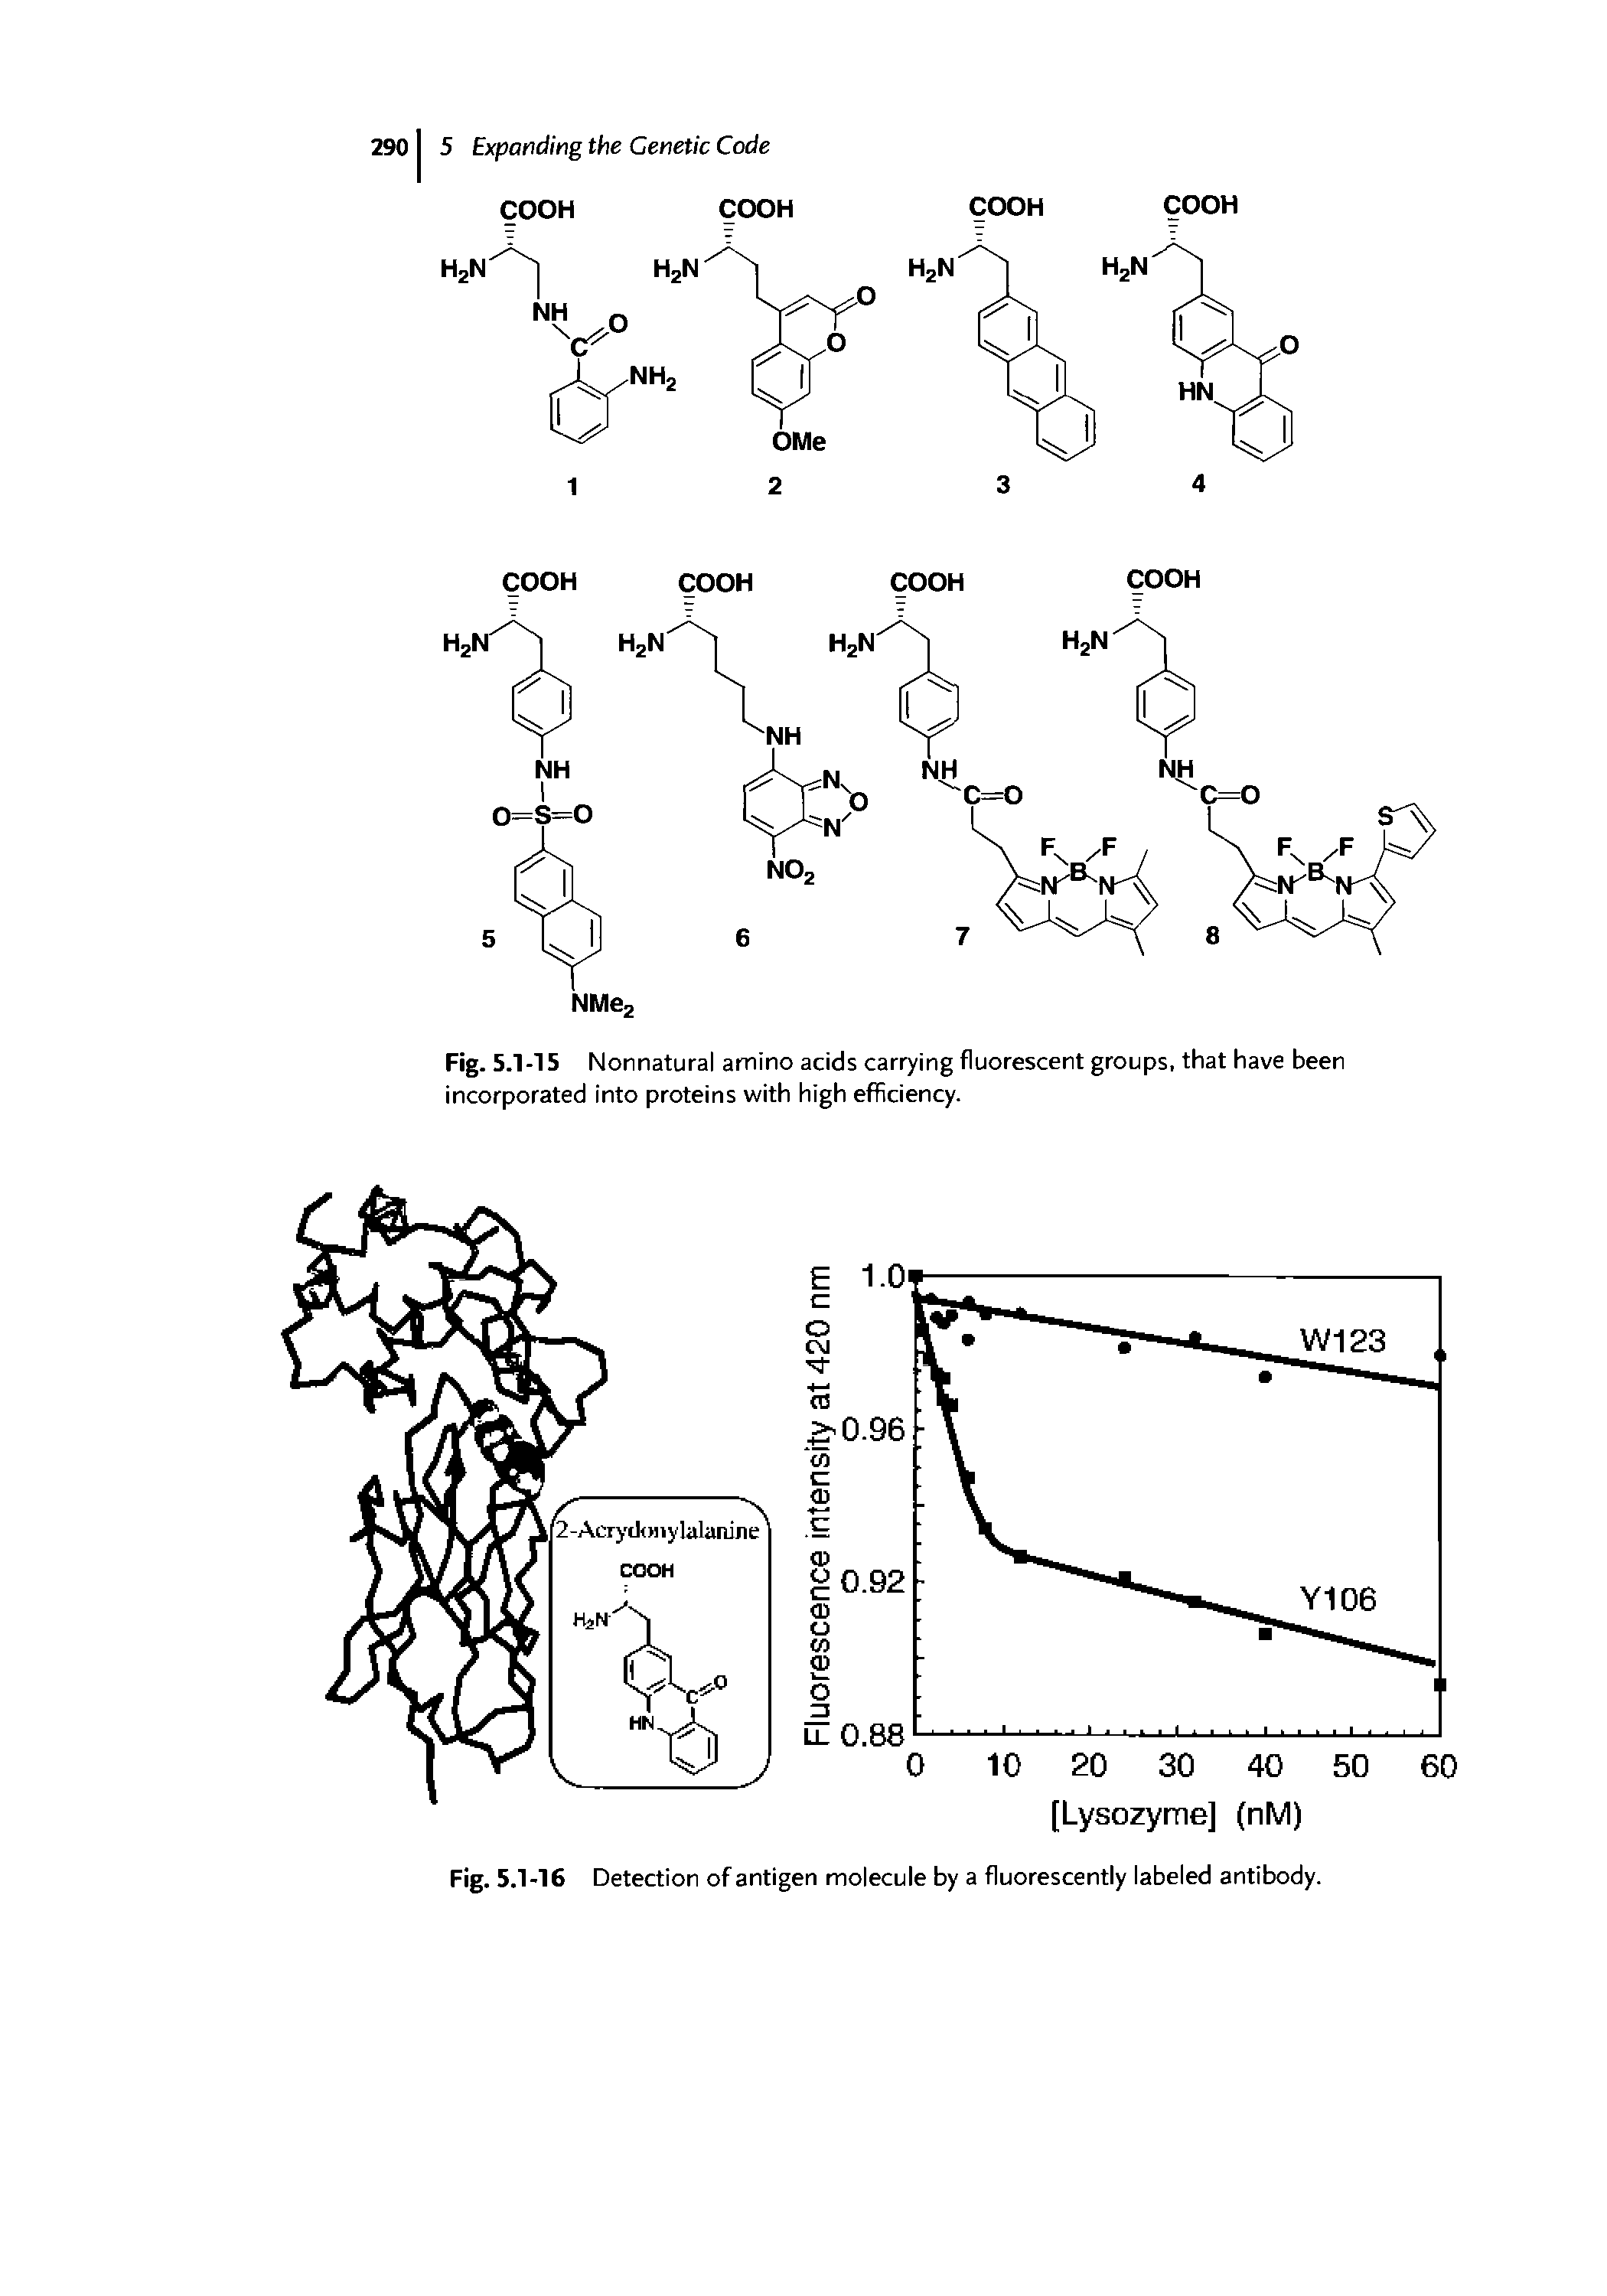 Fig. 5.1-15 Nonnatural amino acids carrying fluorescent groups, that have been incorporated into proteins with high efficiency.